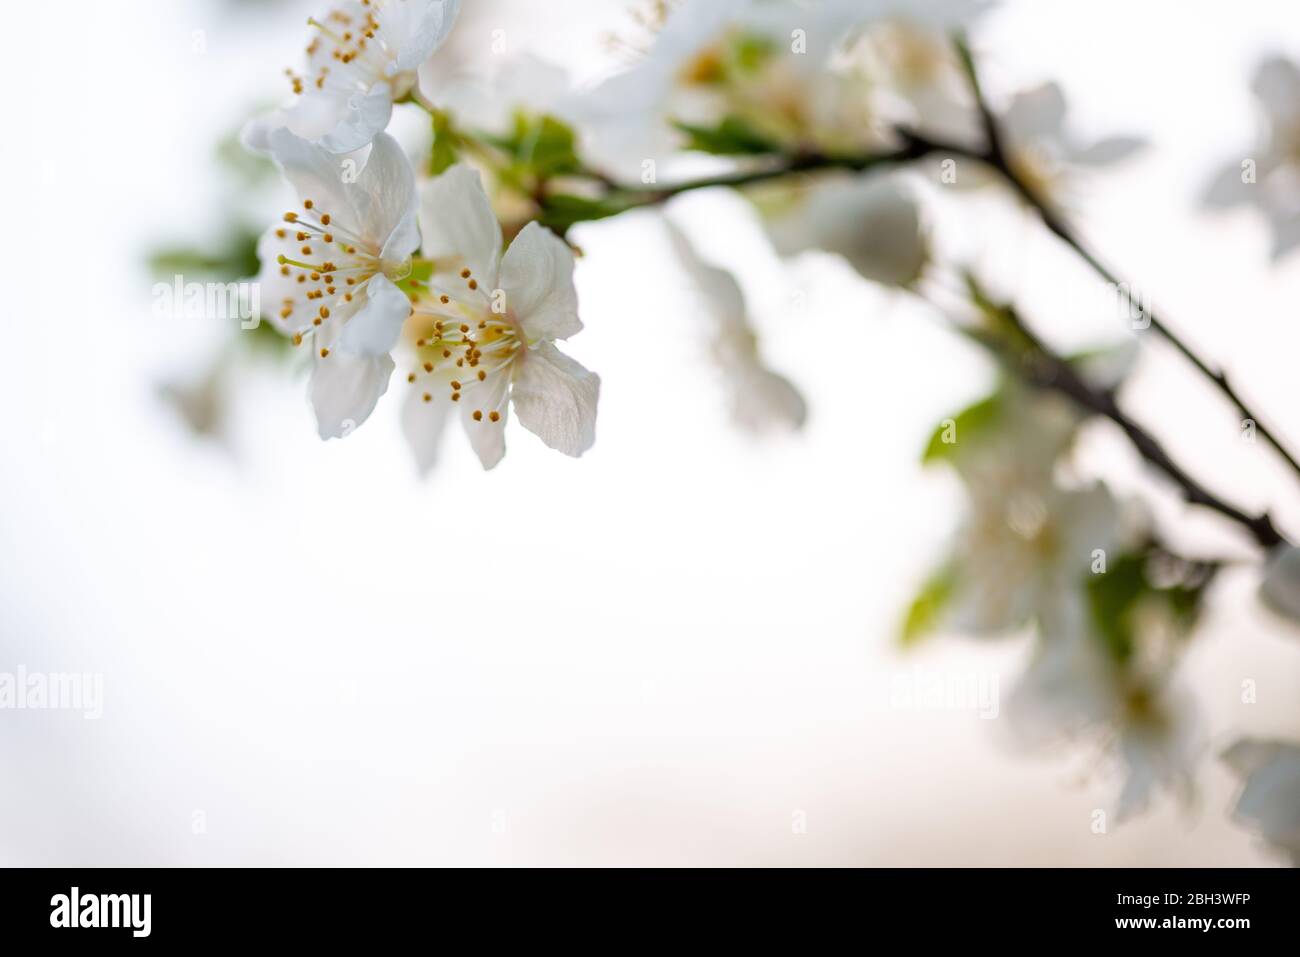 Tree blossom in full bloom. Cherry flowers in small clusters on a fruit tree branch, fading in to white. Shallow depth of field. Focus on center flowe Stock Photo